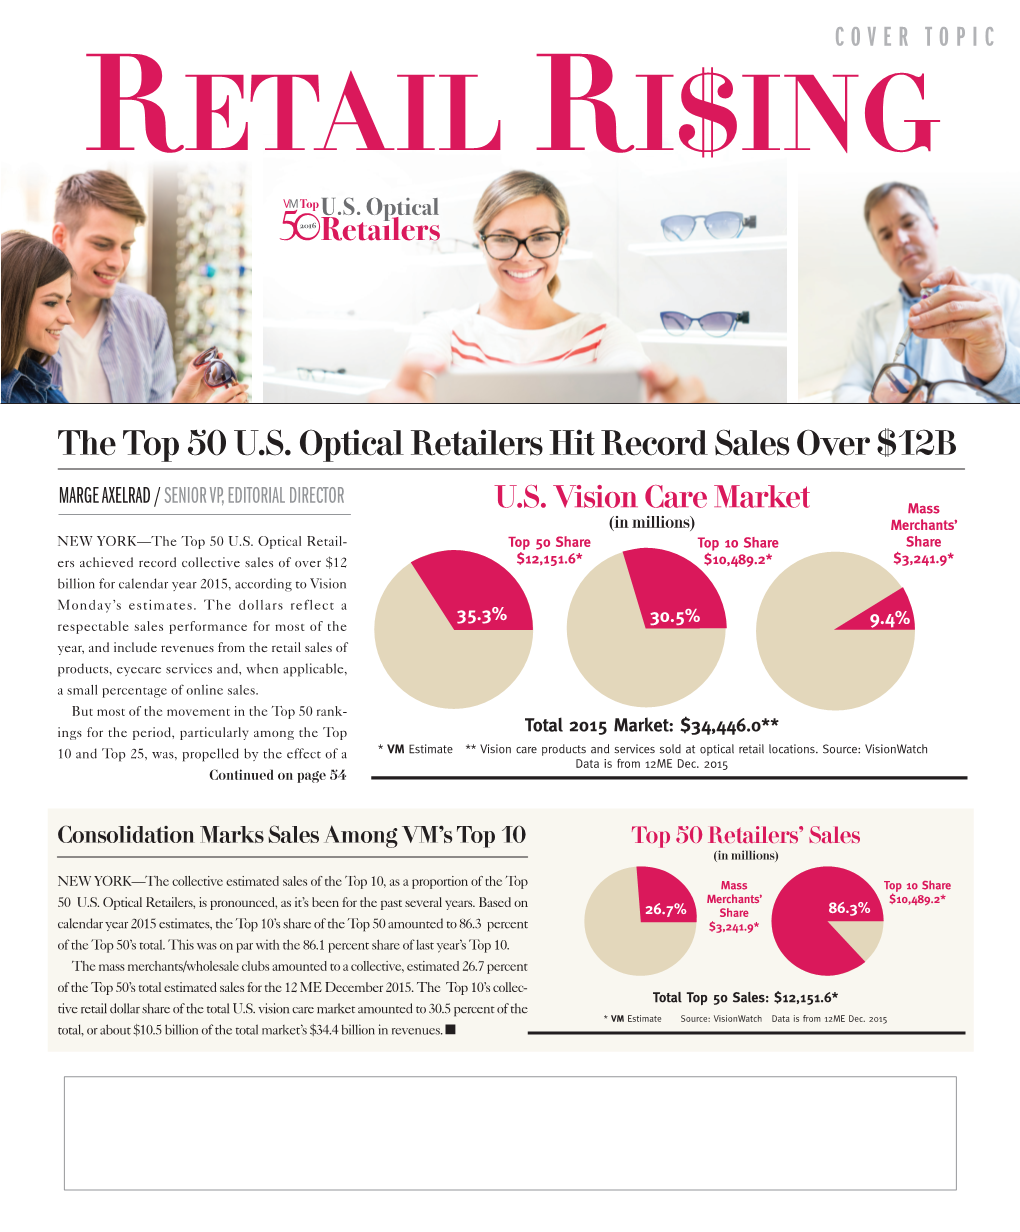 The Top 50 U.S. Optical Retailers Hit Record Sales Over $12B MARGE AXELRAD / SENIOR VP, EDITORIAL DIRECTOR U.S